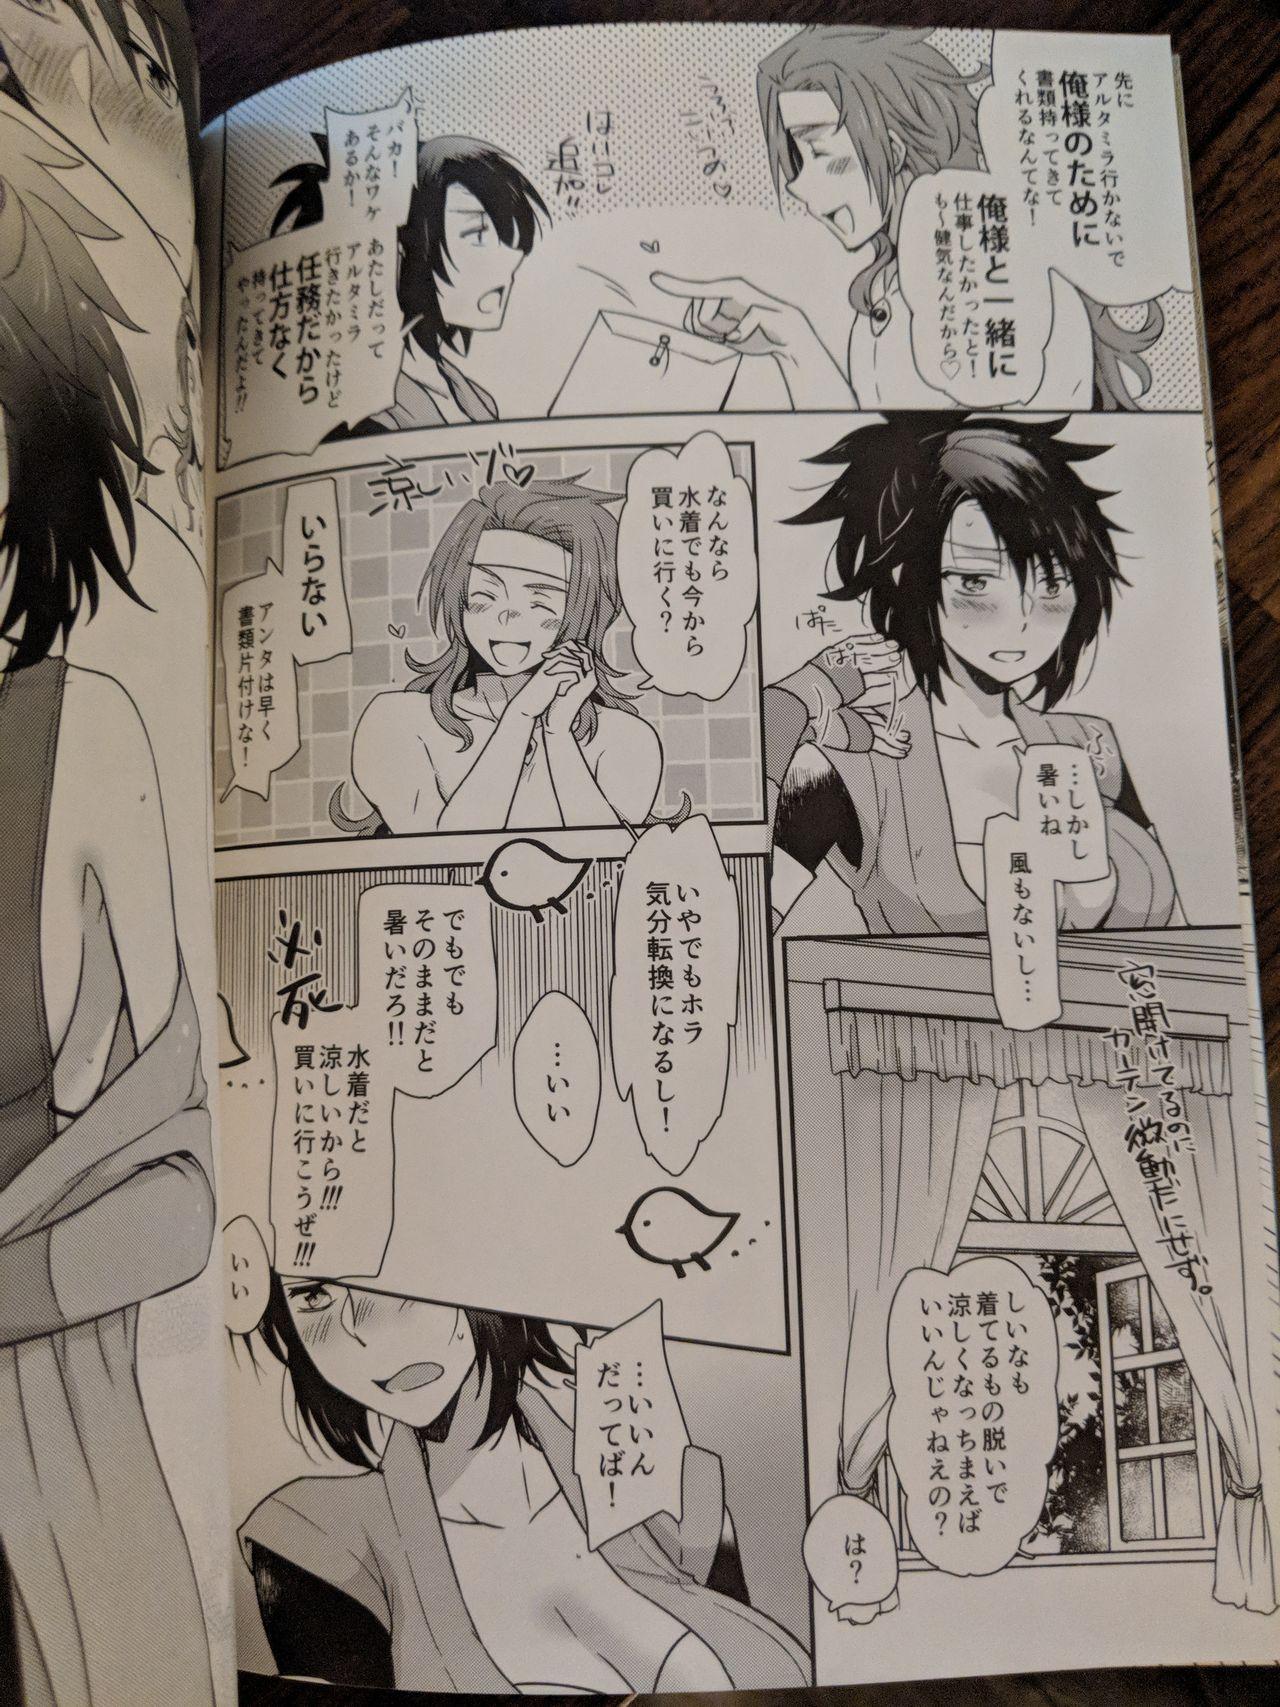 Free Real Porn 彼女が水着にきがえたら - Tales of symphonia Fun - Page 5